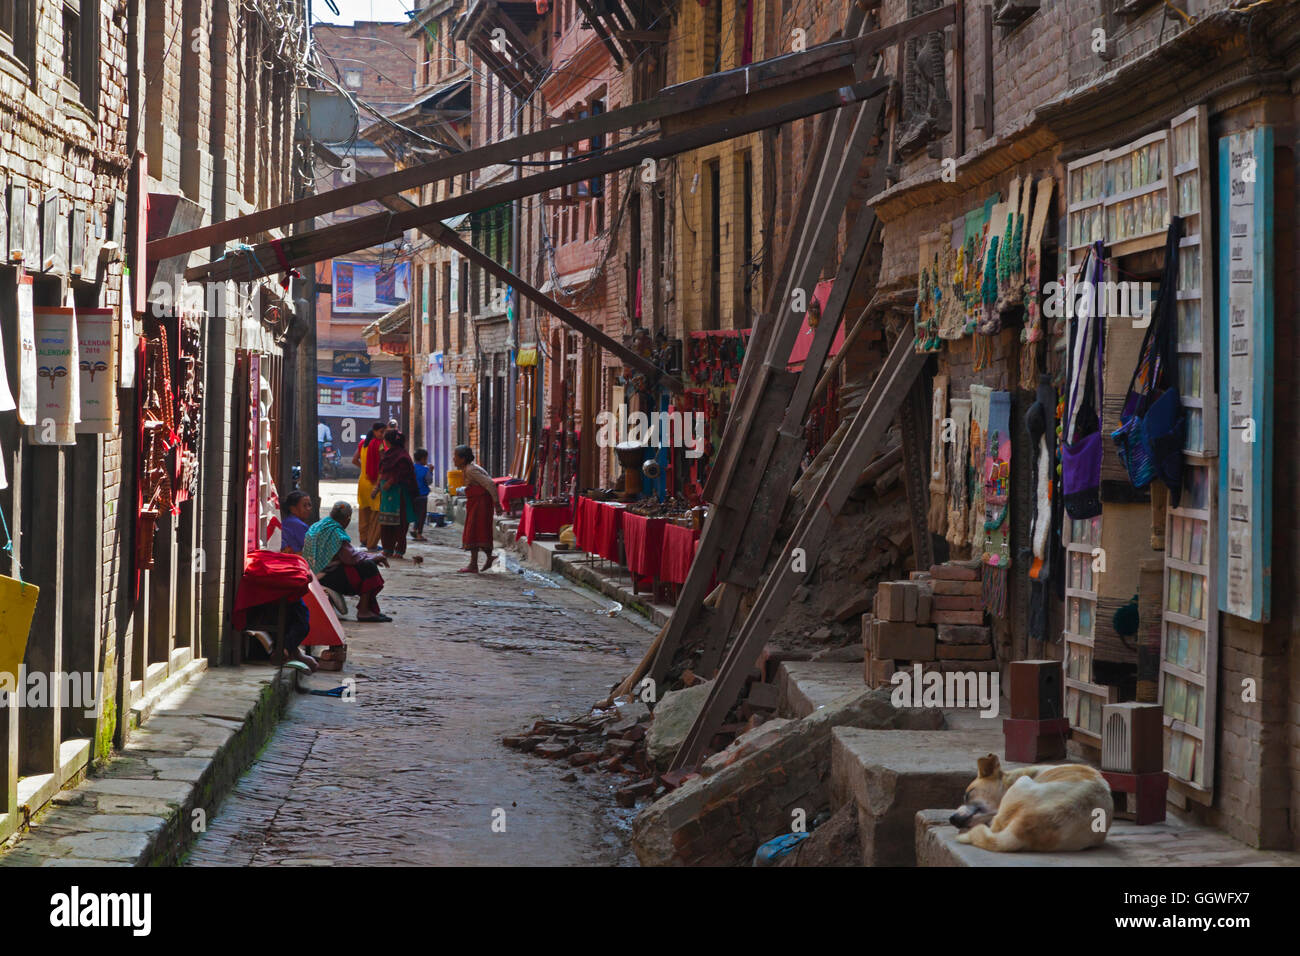 The traditional town of BHAKTAPUR which was severely damaged by the 2015 earthquake - NEPAL Stock Photo